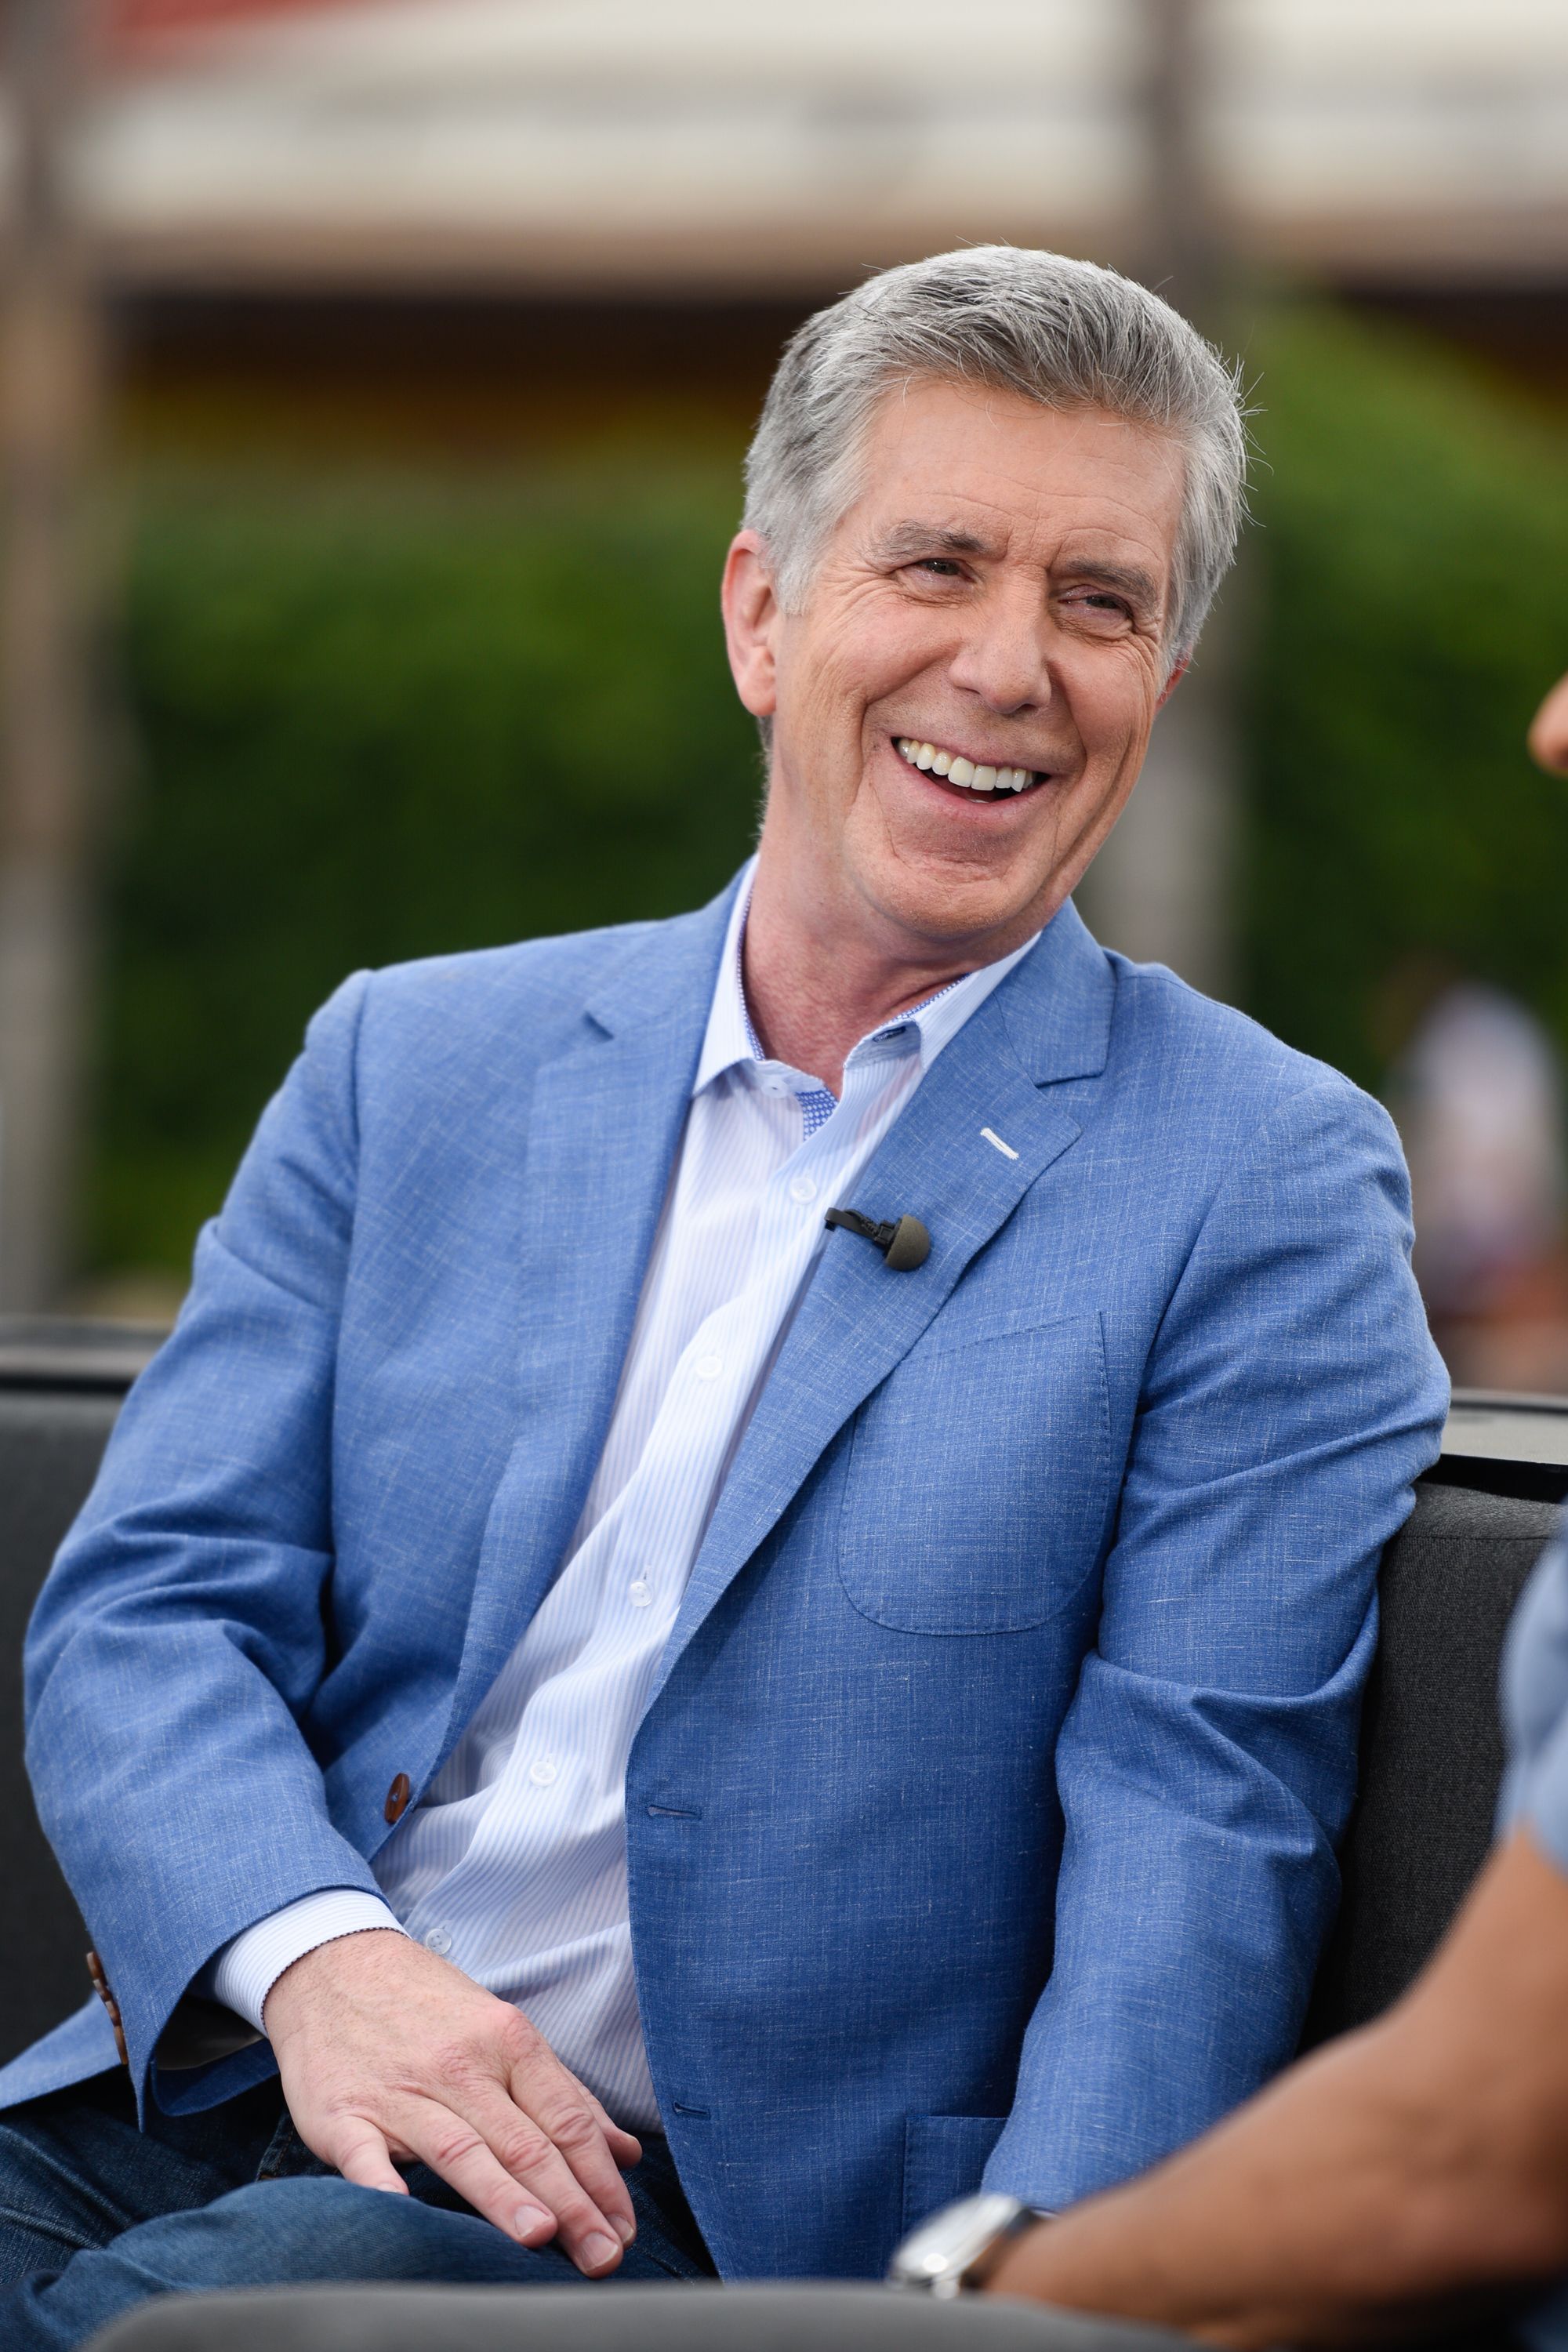 Tom Bergeron goes to "Extra" at Universal Studios Hollywood on May 11, 2016 in Universal City, California. | Source: Getty Images